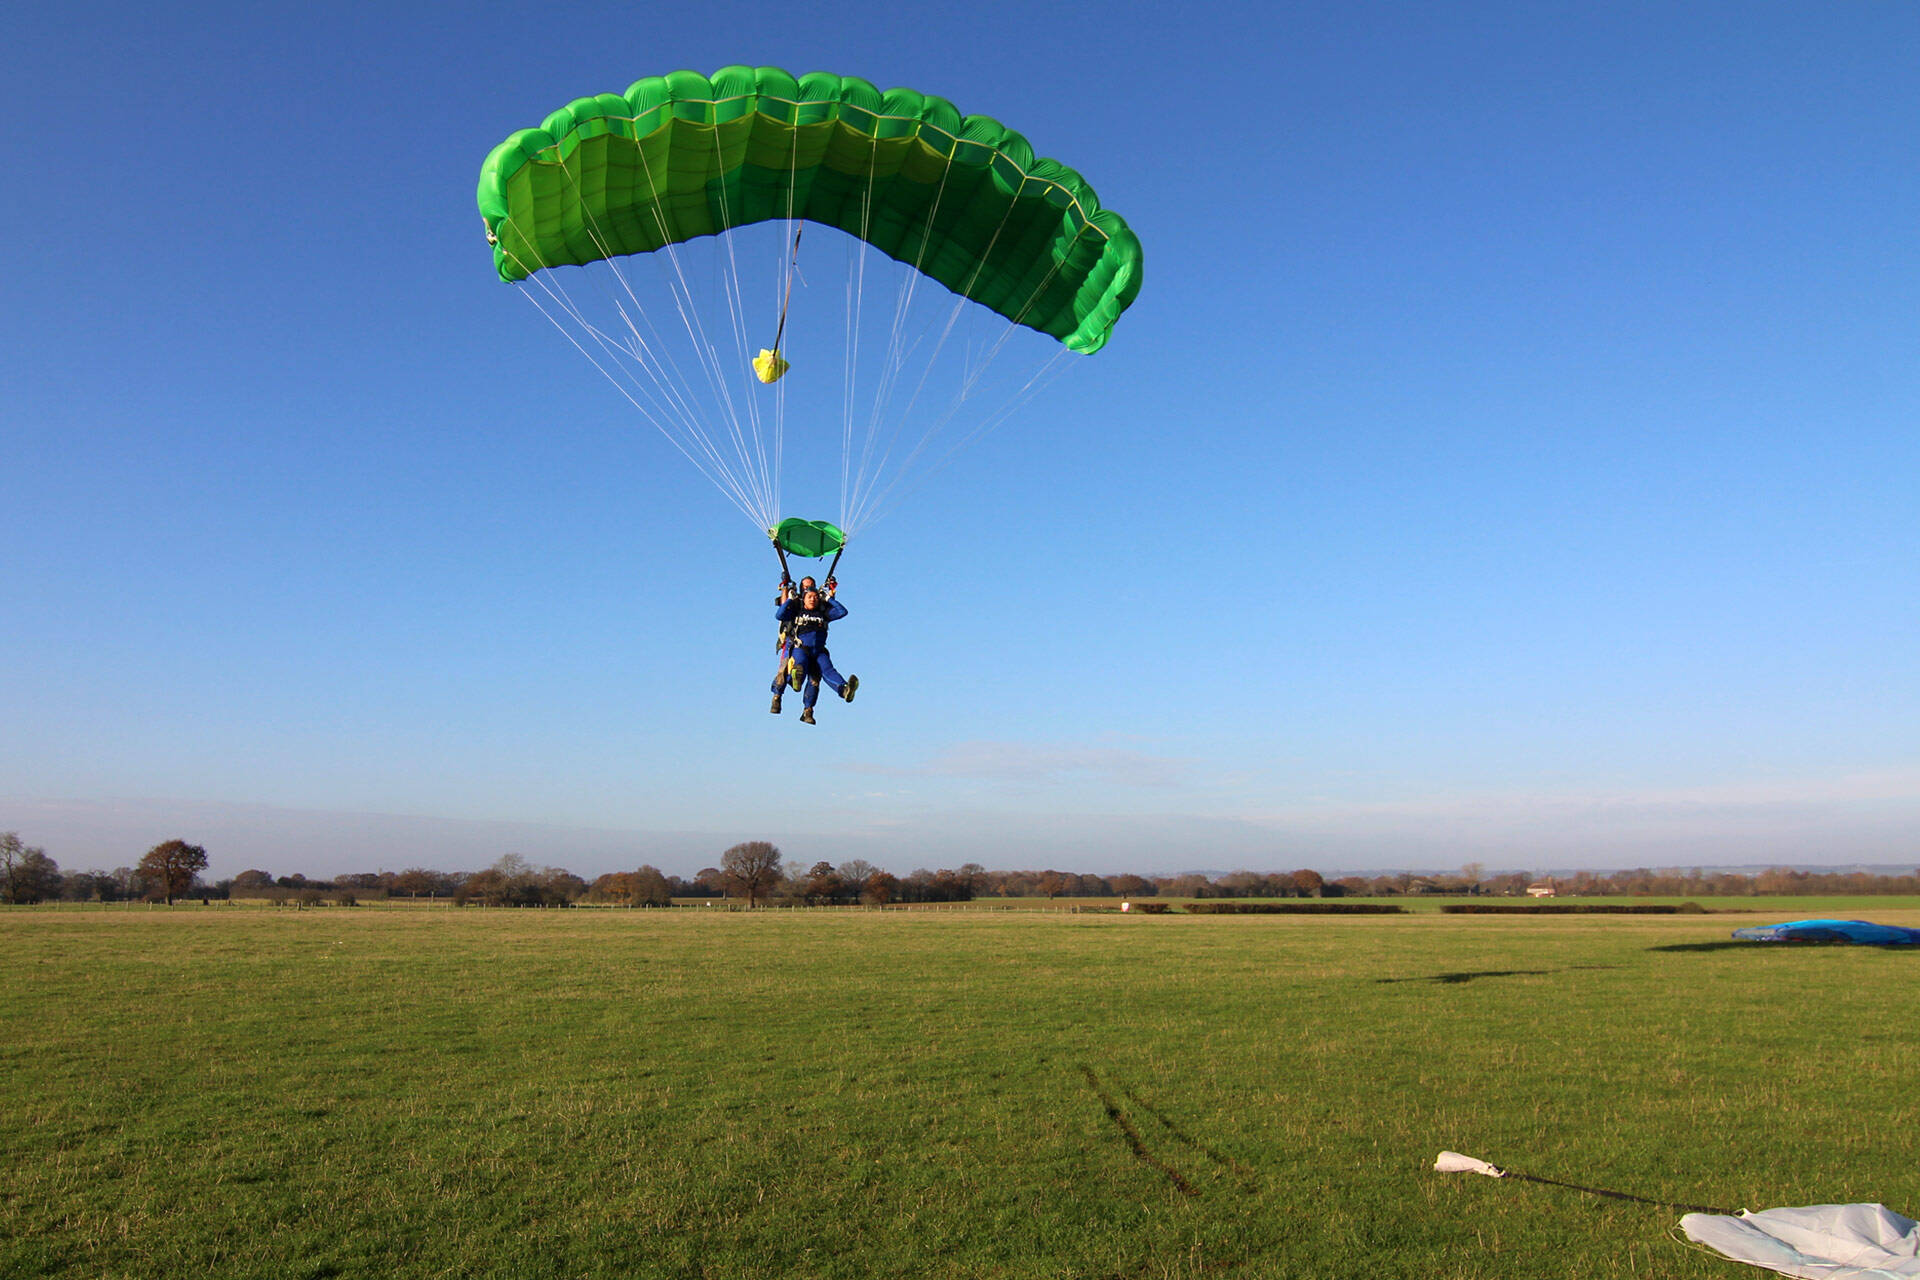 Two people skydiving, coming in to land